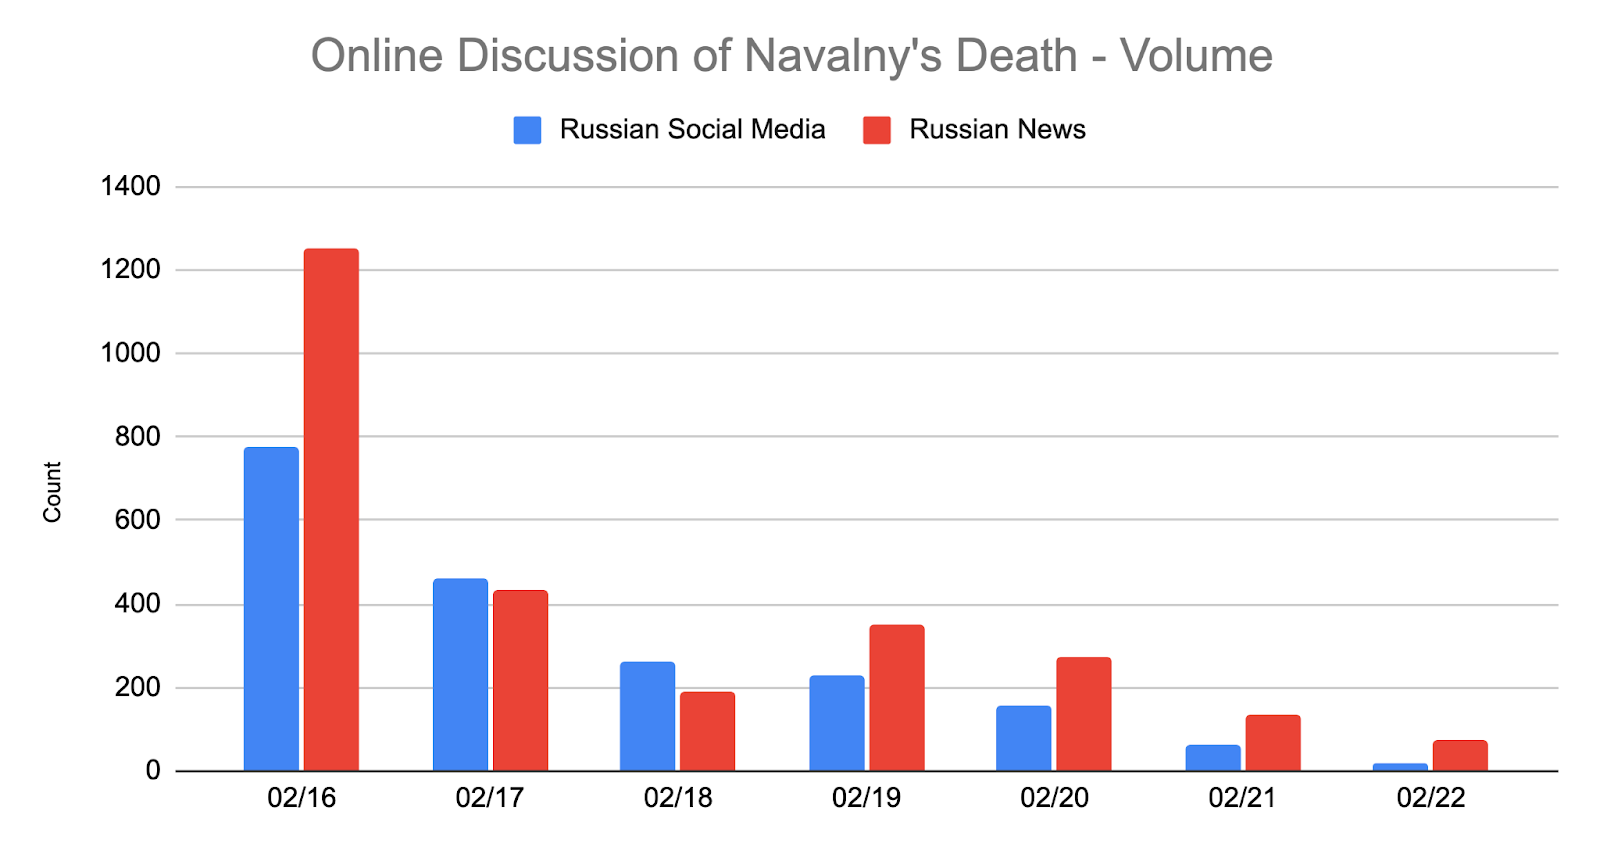 What are Russians Saying About the Death of Navalny?